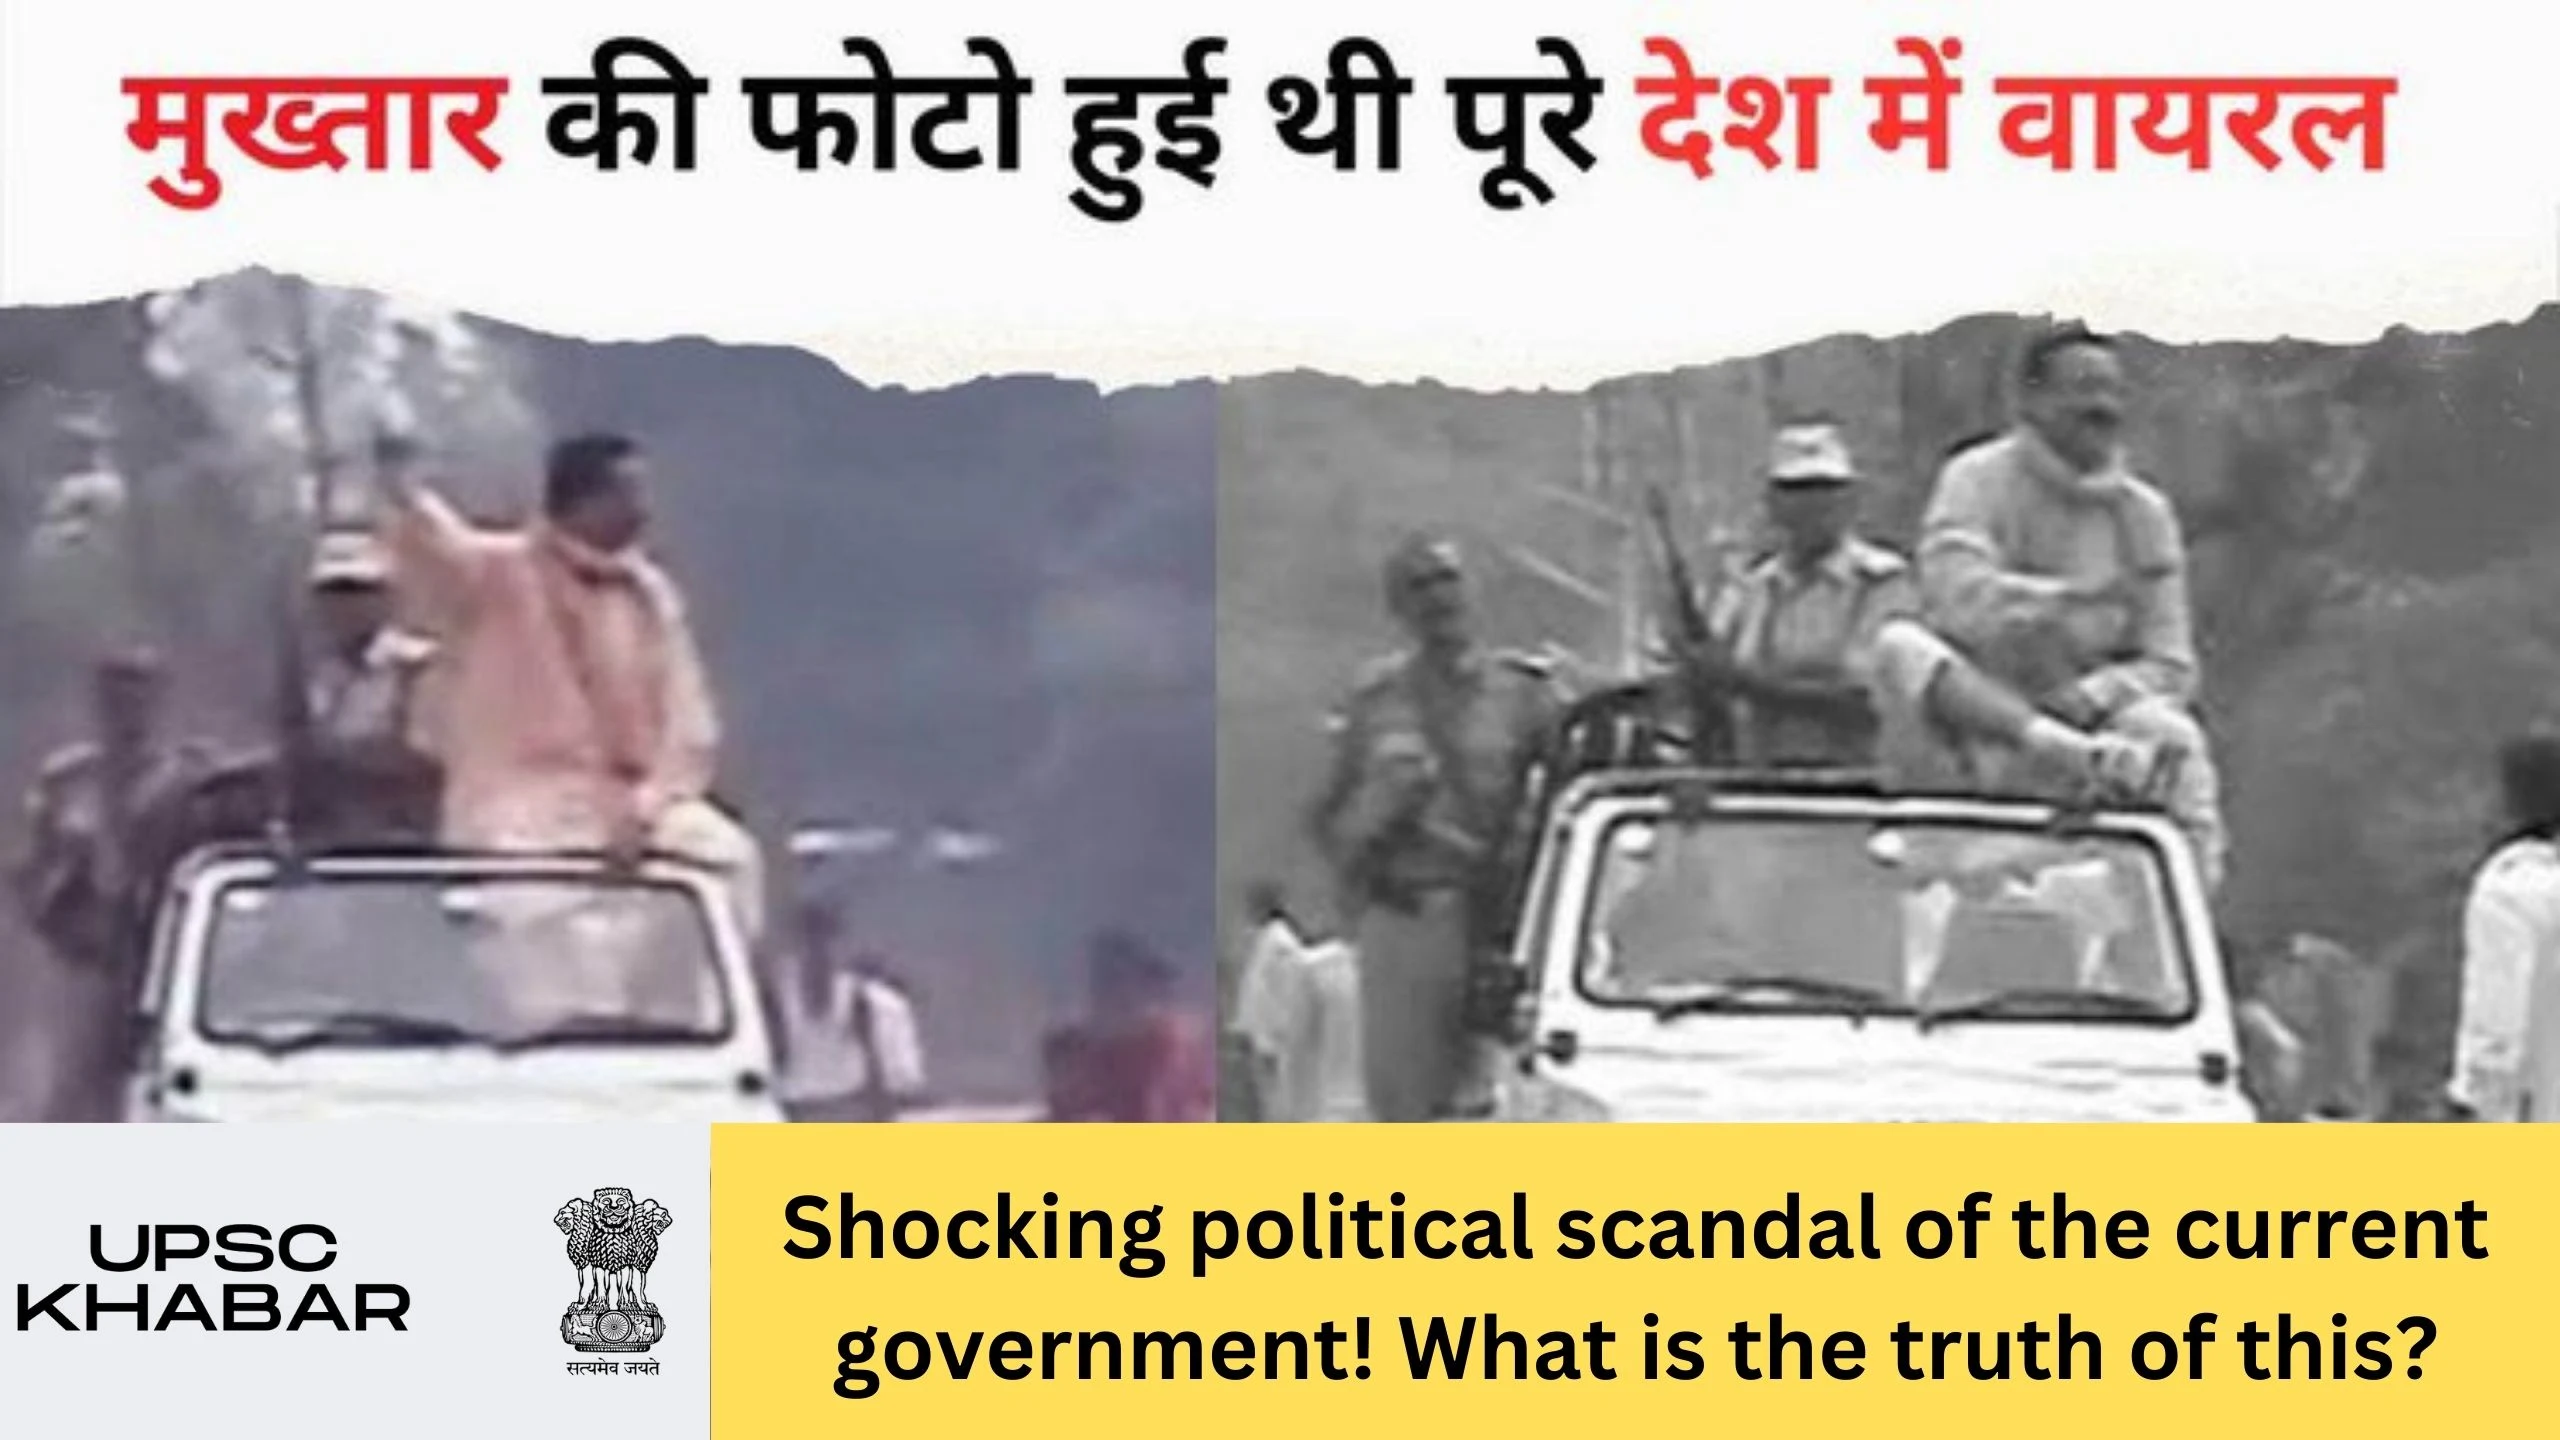 Shocking political scandal of the current government! What is the truth of this?